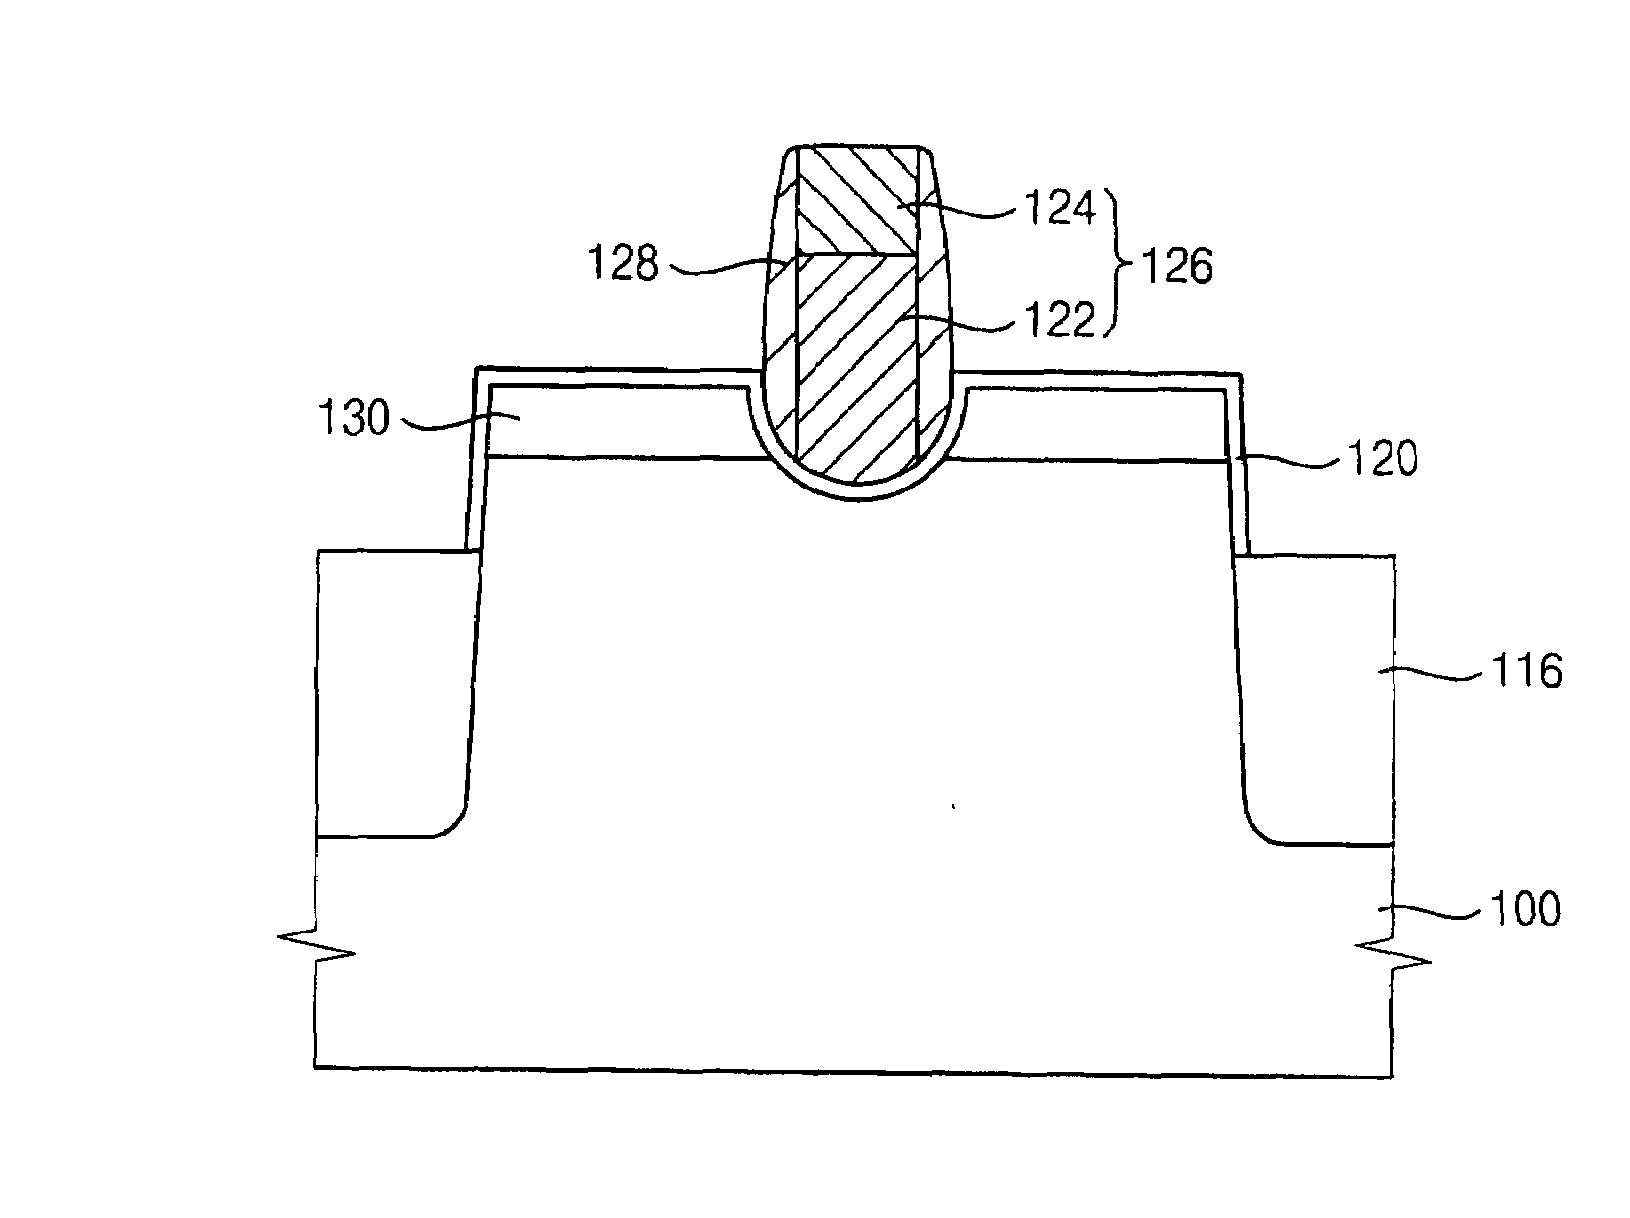 Fin field effect transistor and method for forming the same